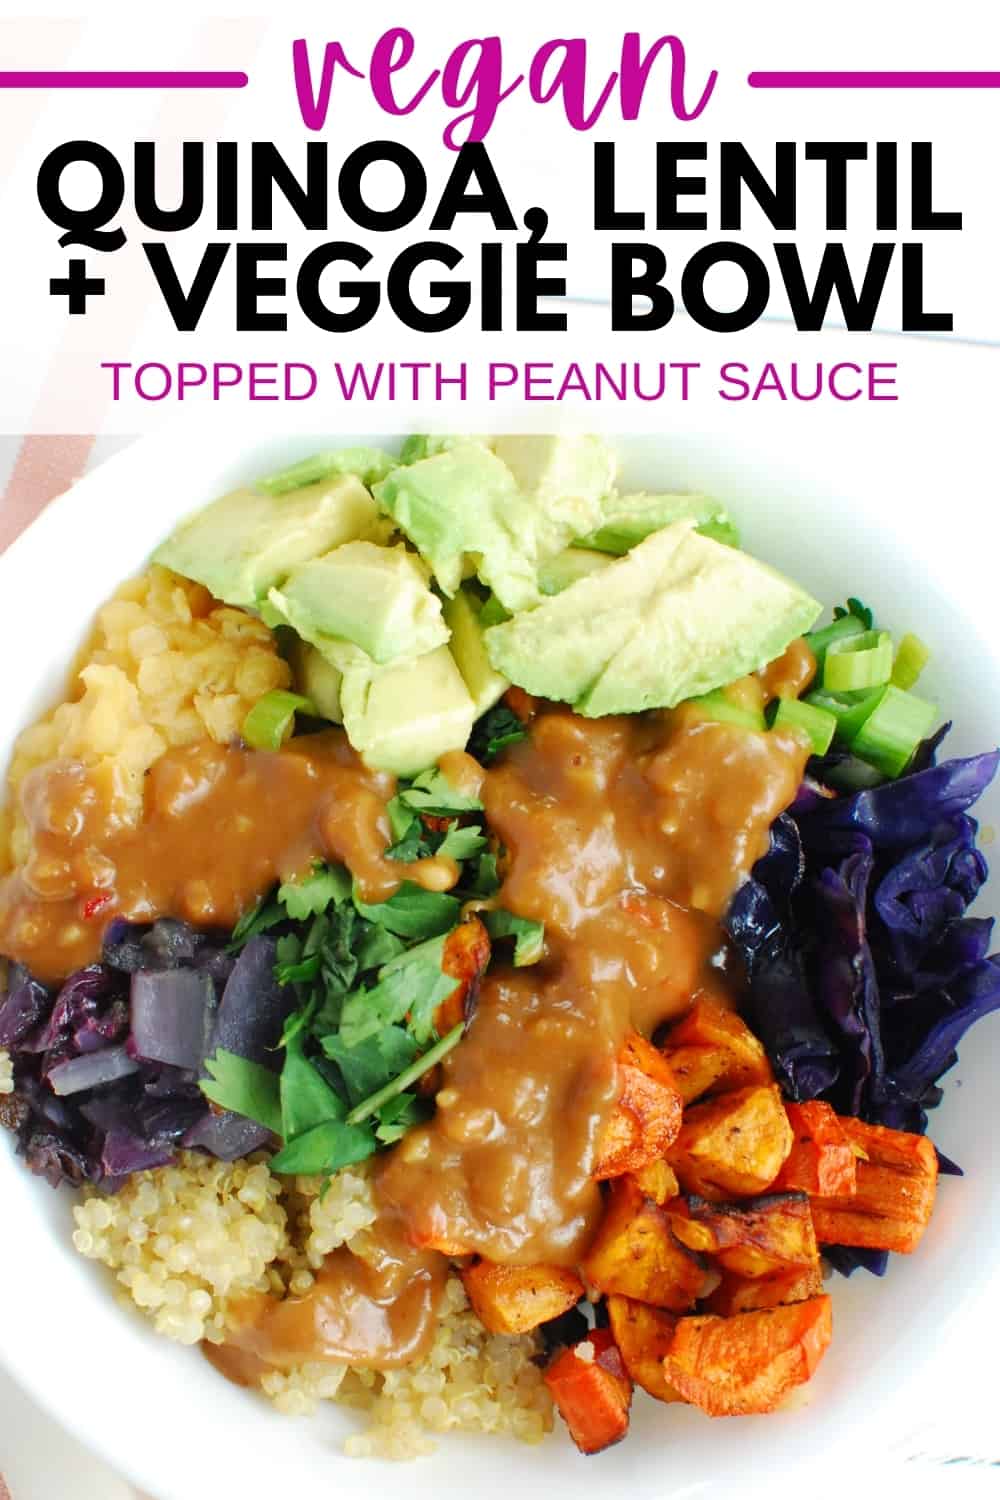 A vegan lentil quinoa bowl topped with peanut sauce, along with a text overlay for Pinterest.